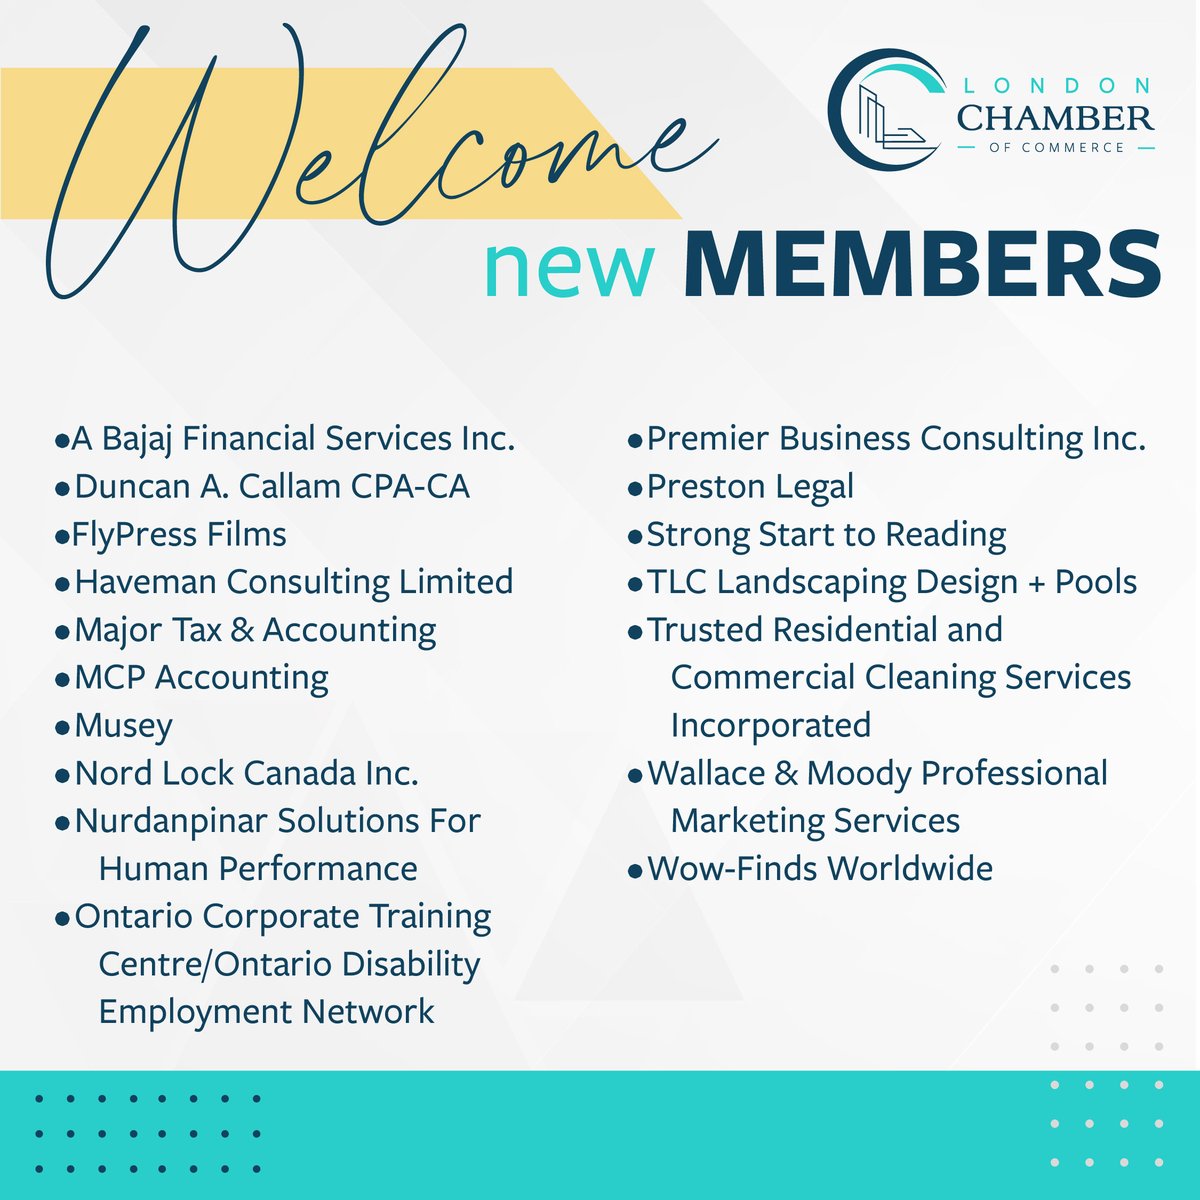 Say 👋 to our new members who joined us in February and March! You can learn more about our new members by visiting our member directory: business.londonchamber.com/list/